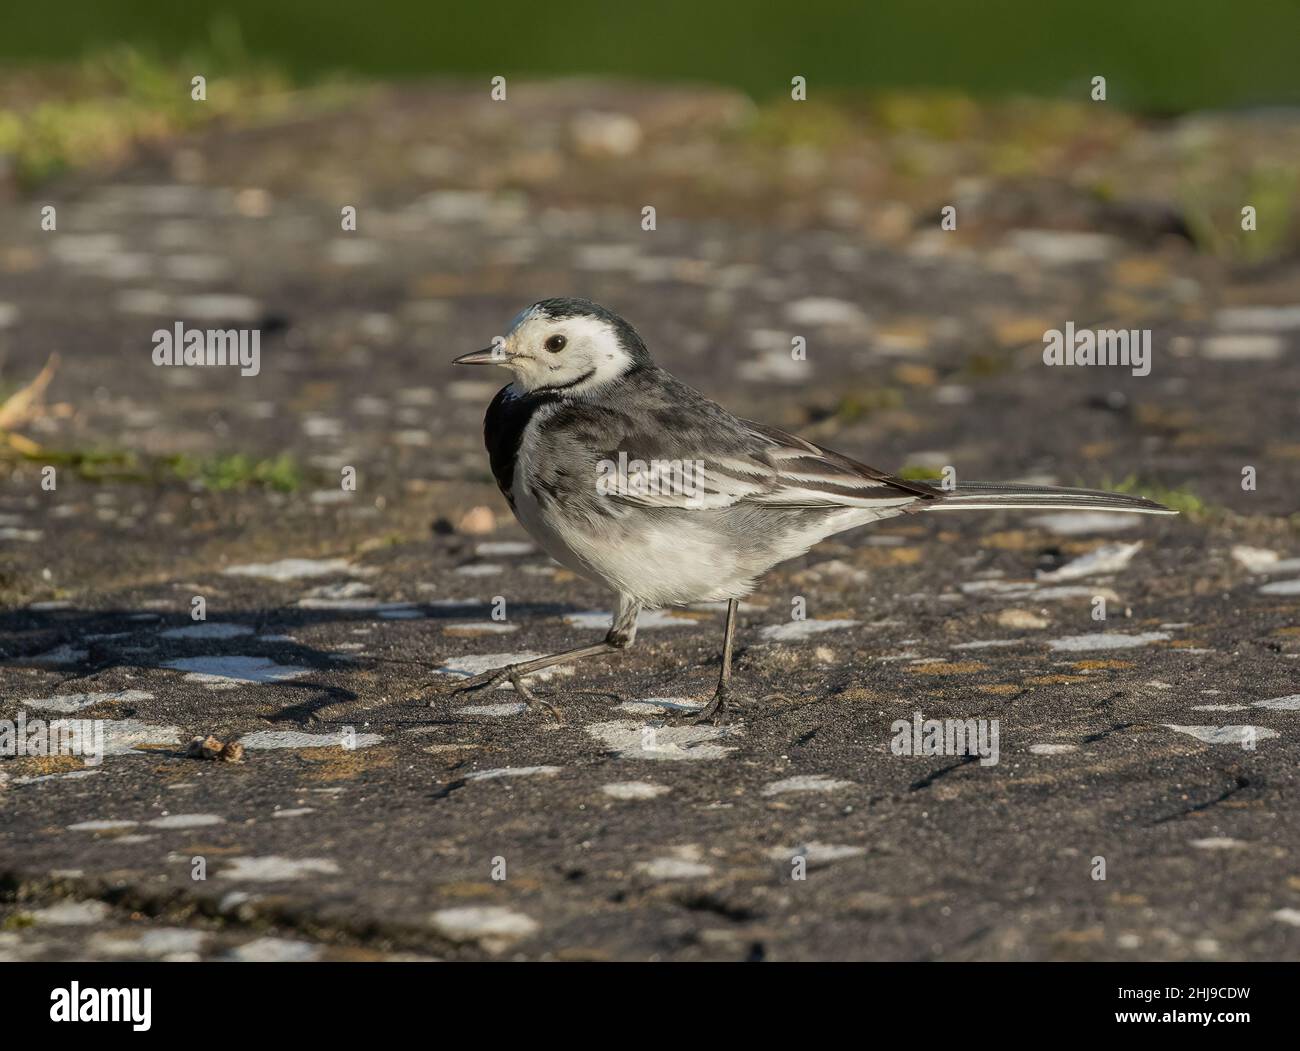 Urban bird . A little Pied Wagtail searching for food on a paved surface. Suffolk, UK. Stock Photo